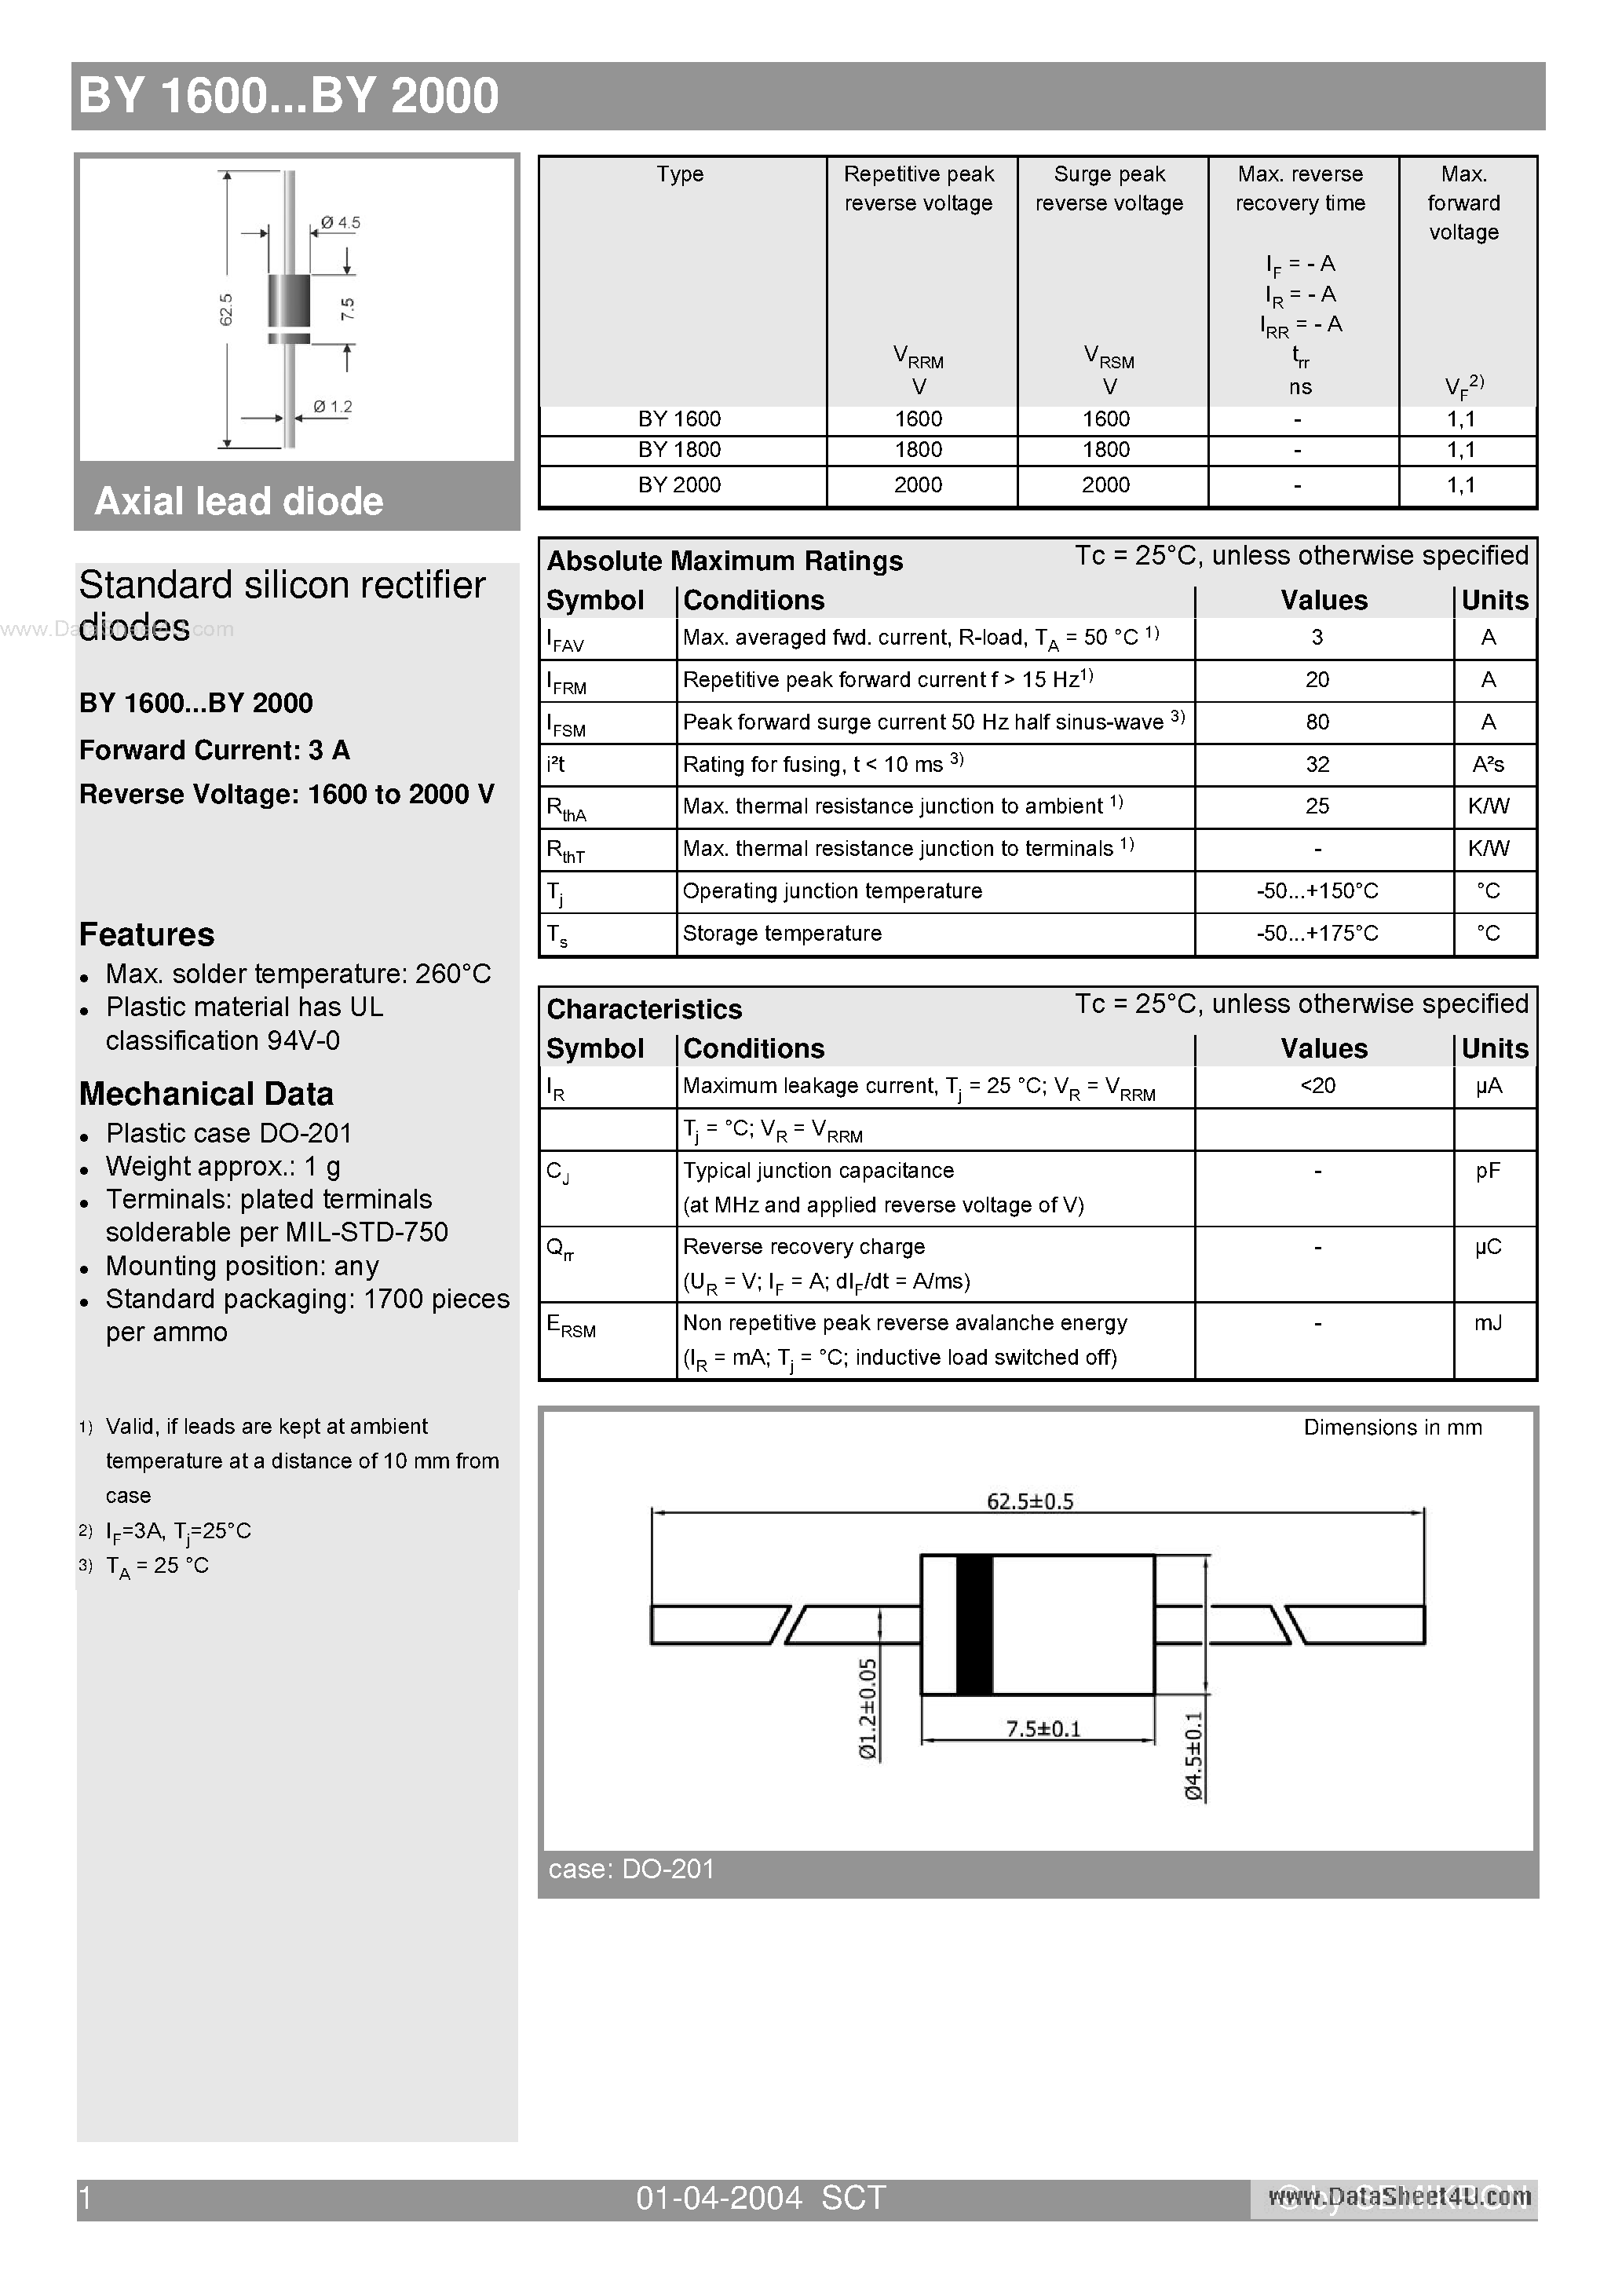 Datasheet BY1600 - Standard silicon rectifier diodes page 1